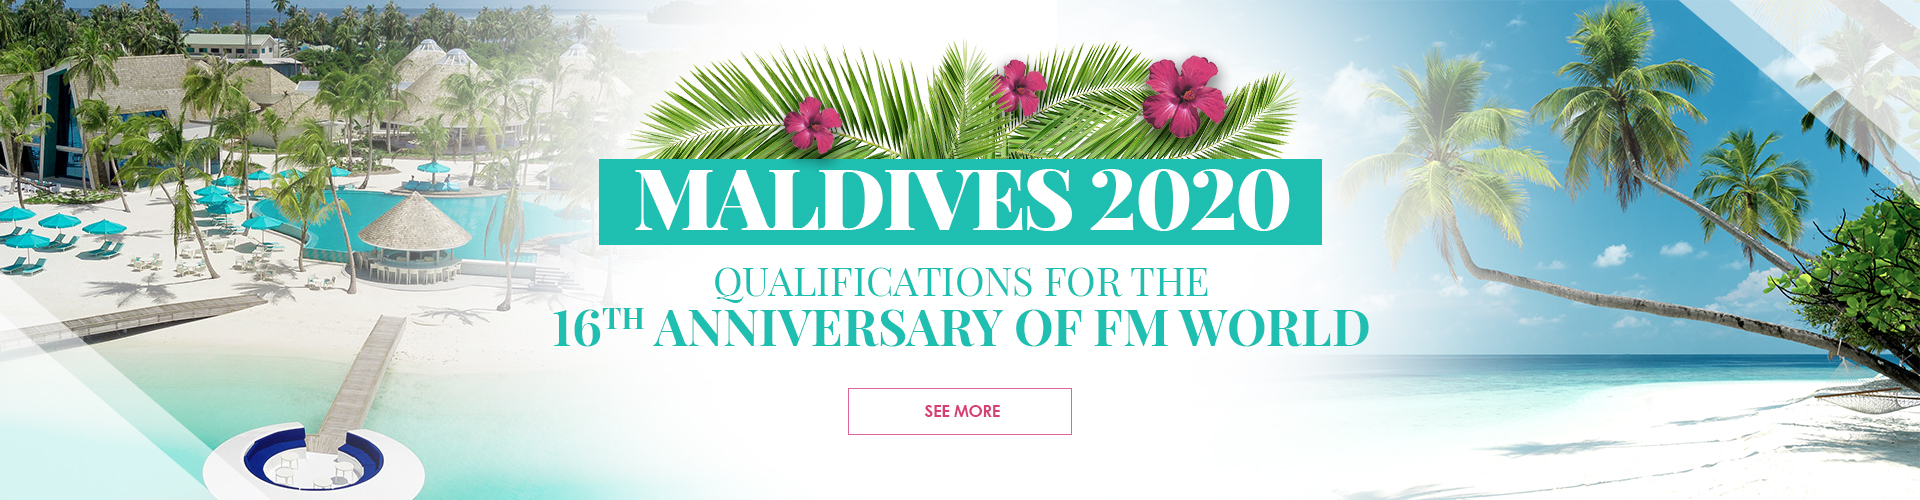 Maldives 2020 – qualification for the 16th Anniversary of FM WORLD